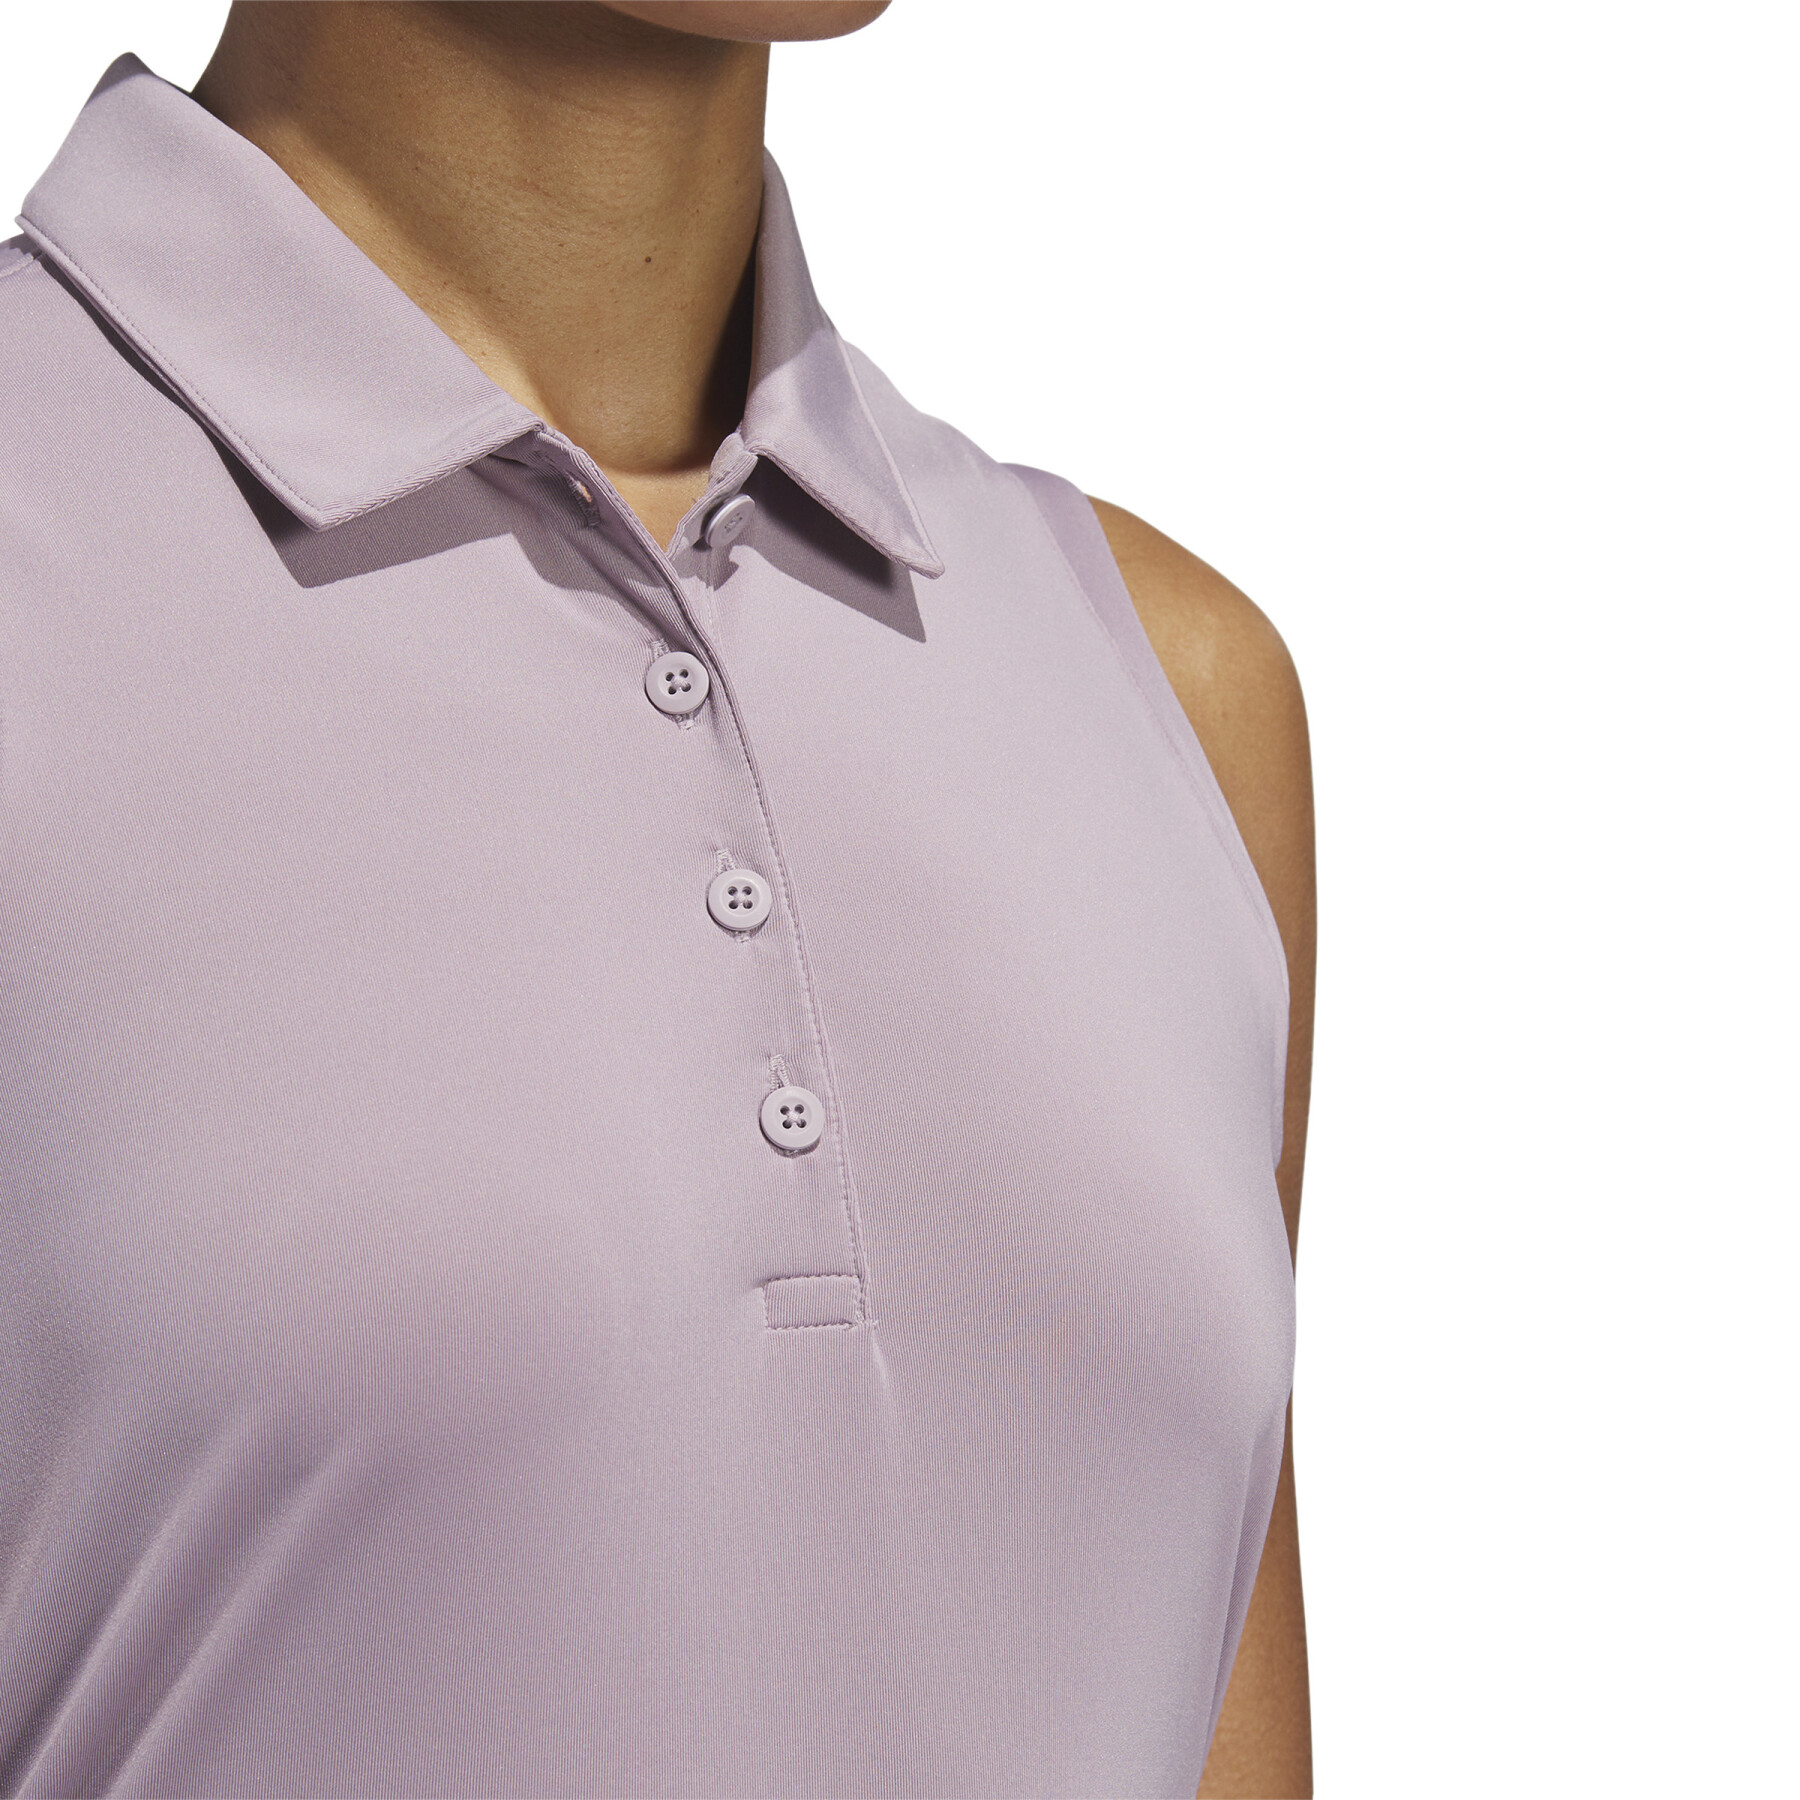 Polo sans manches femme adidas Ultimate365 Solid